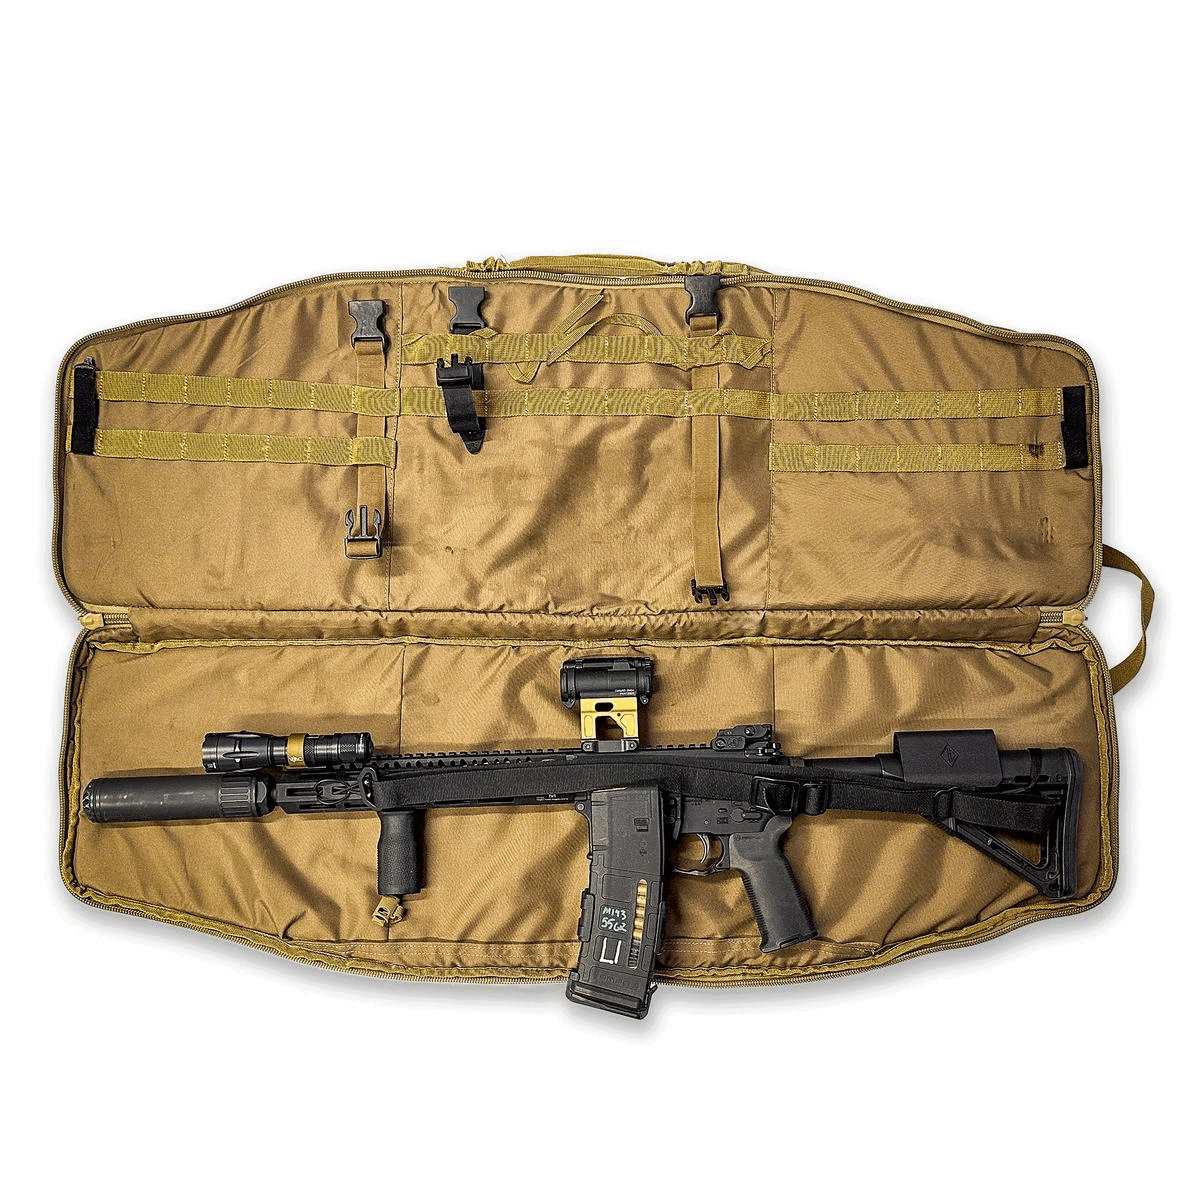 MOLLE Velcro Straps with Side Release Buckles (Tie Down Strap for Pelican Case, Grey Man Tactical, Soft Gun Case, Lashing Strap for Rucks,etc.)